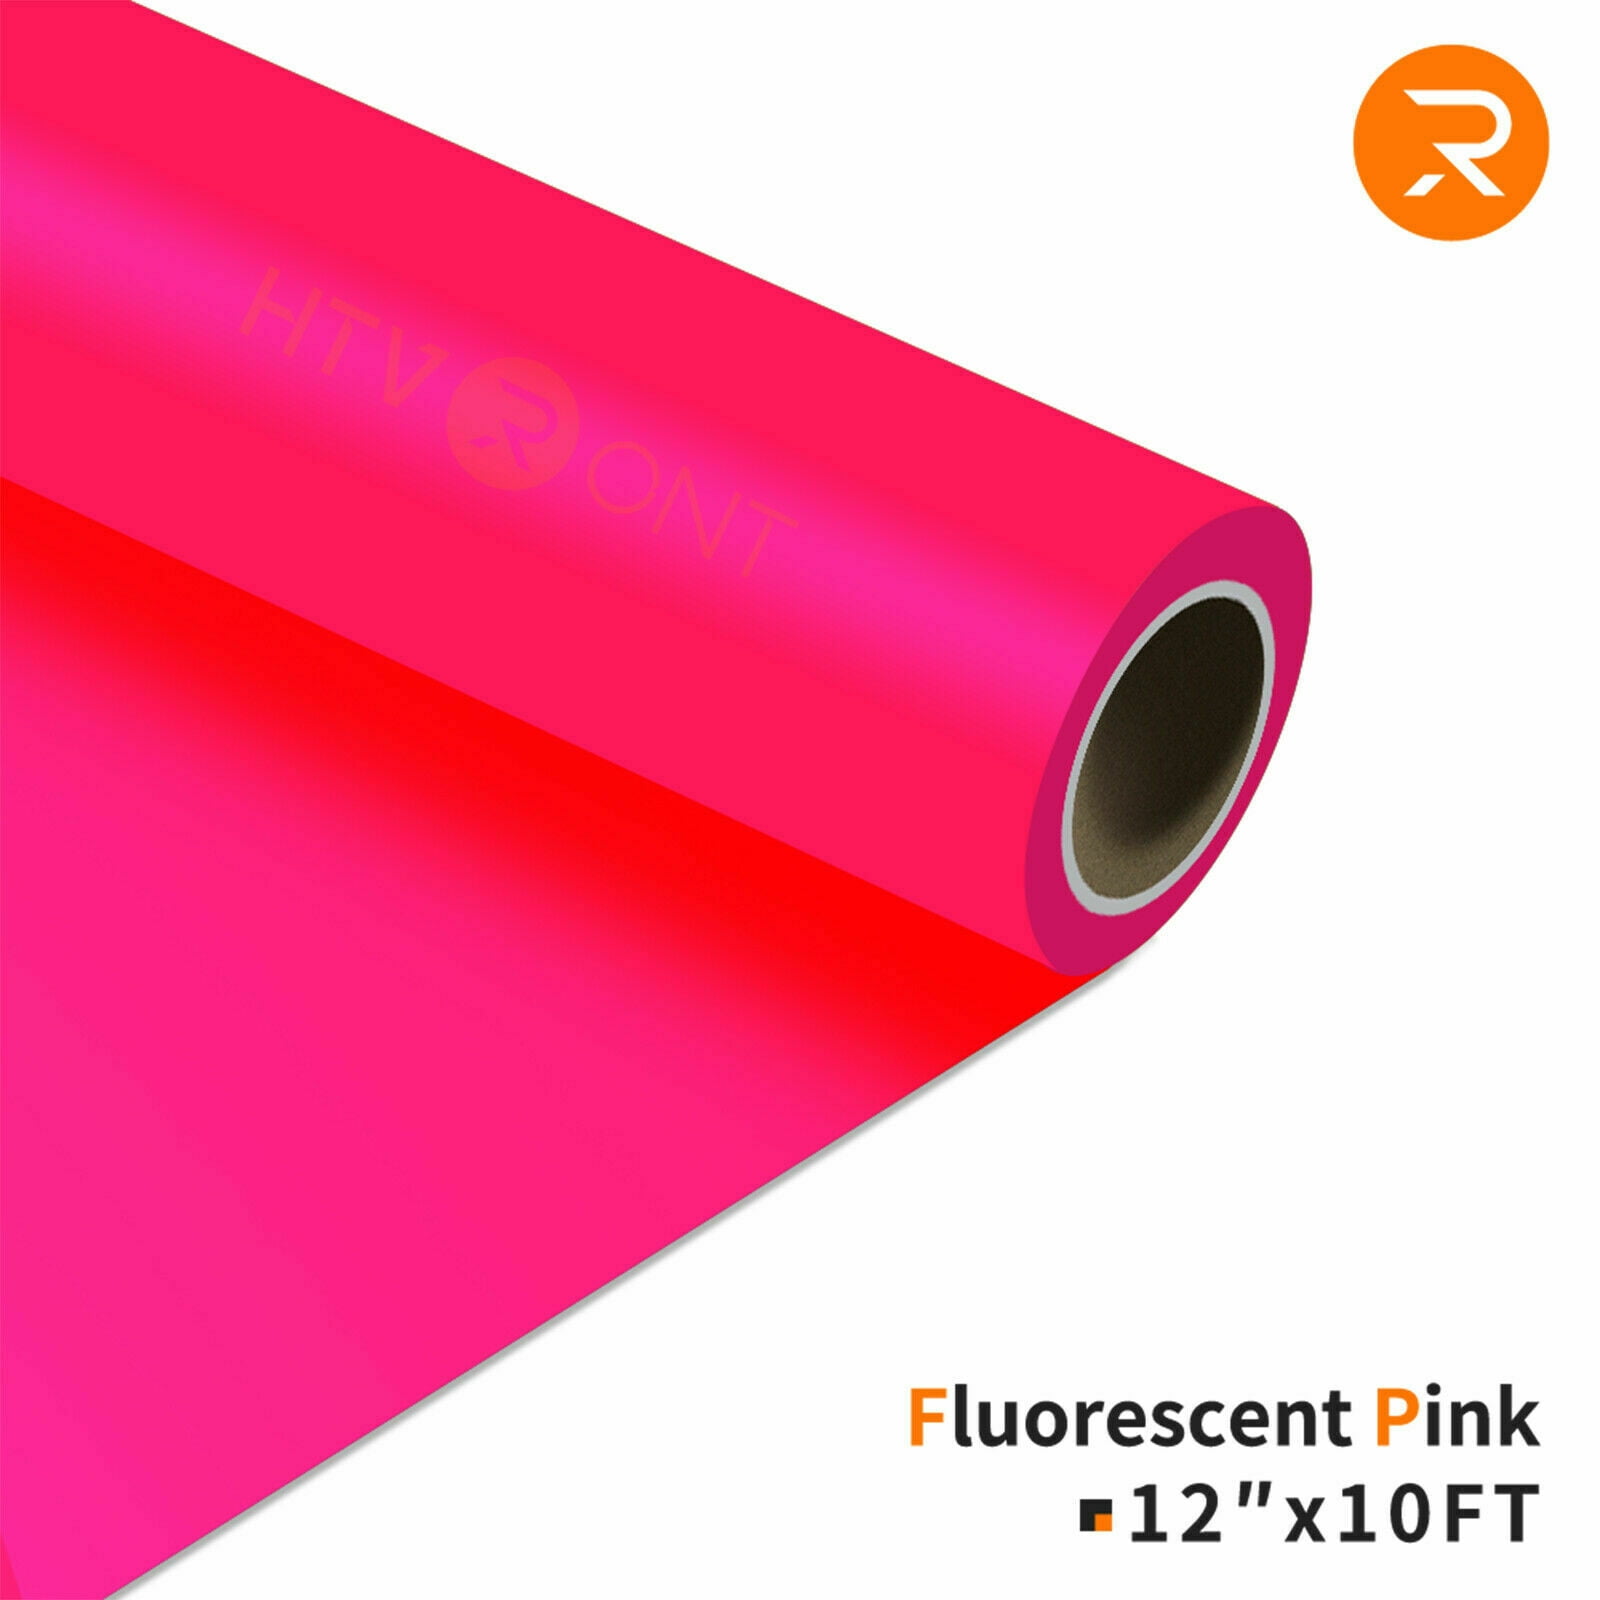 Fluorescent Pink Heat Transfer Vinyl Rolls - 12 x 10FT Iron on Vinyl for  Shirts,Iron on for Cricut & All Cutter Machine-Easy to Cut & Weed for Craft  Heat Vinyl Design（Fluorescent Pink ） 